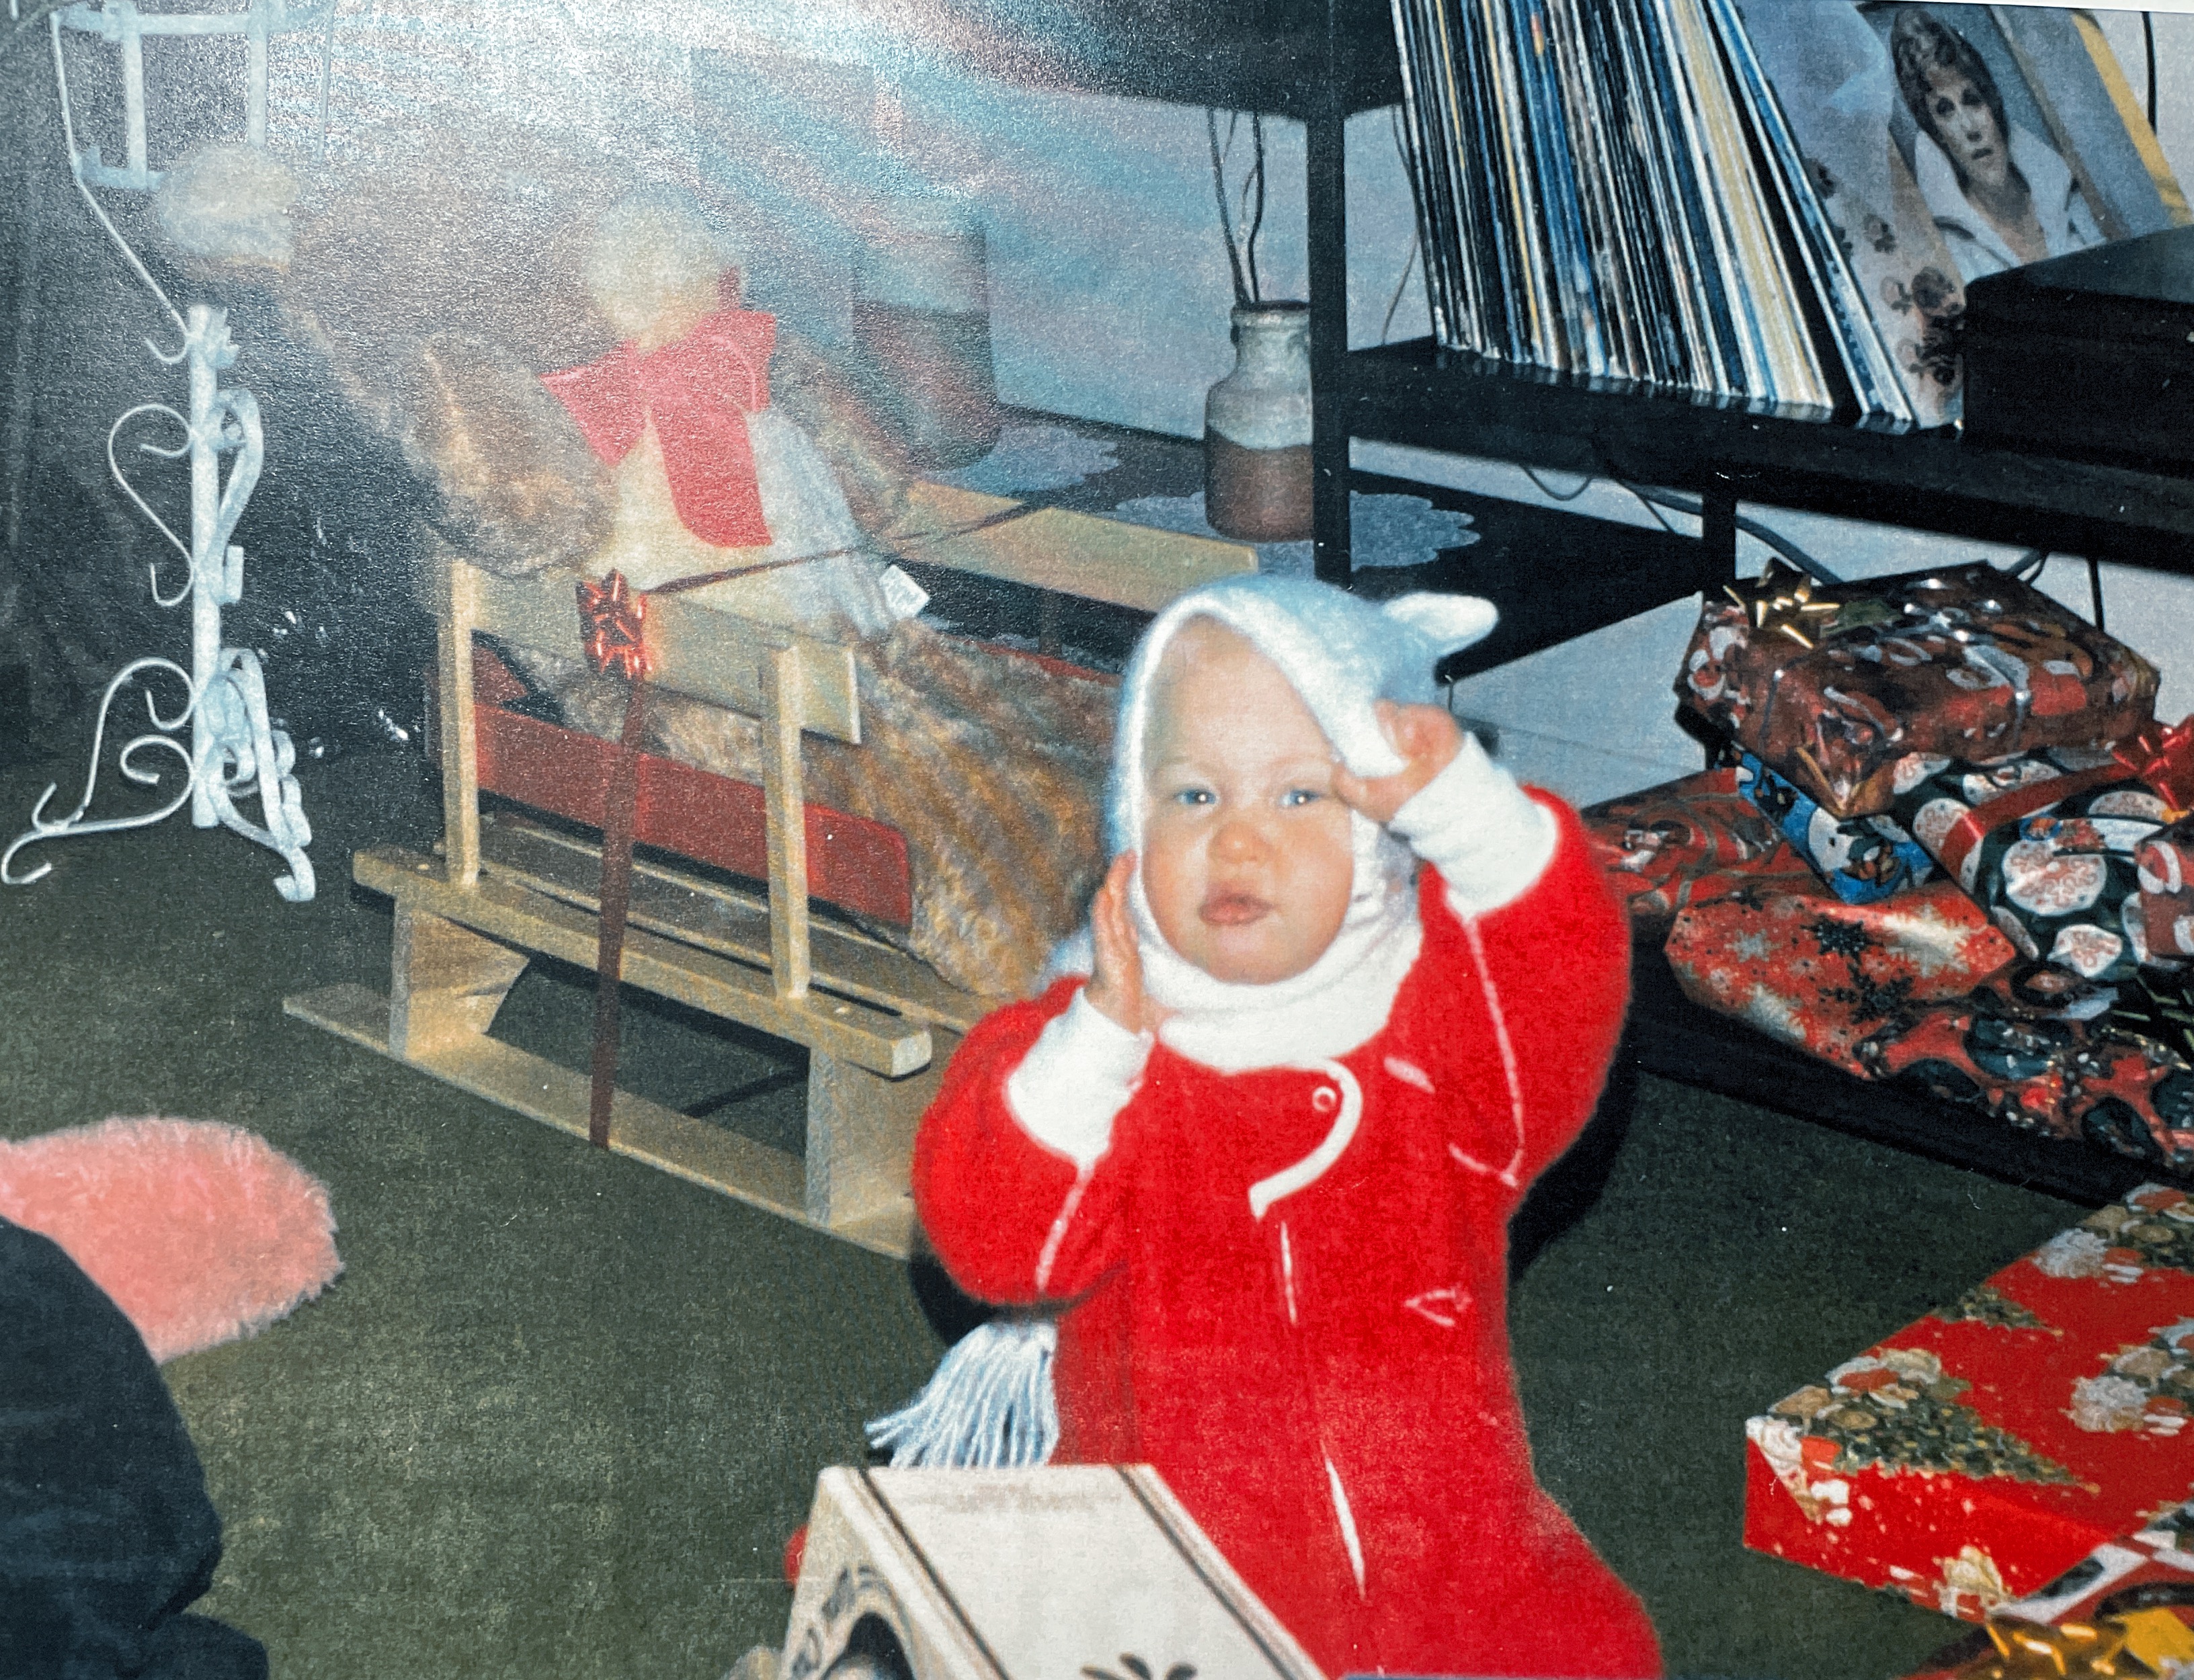 Our daughter’s first Christmas at 10 months old. 1981